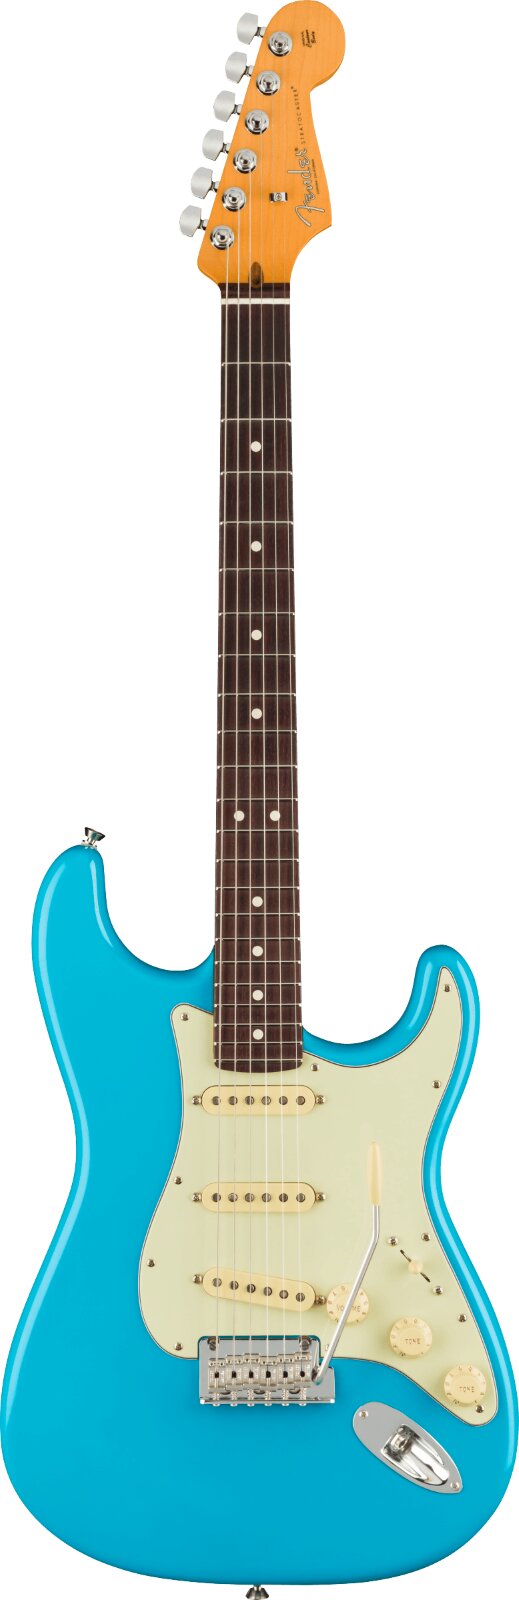 Fender American Professional II Stratocaster Rosewood Fingerboard Miami Blue : photo 1